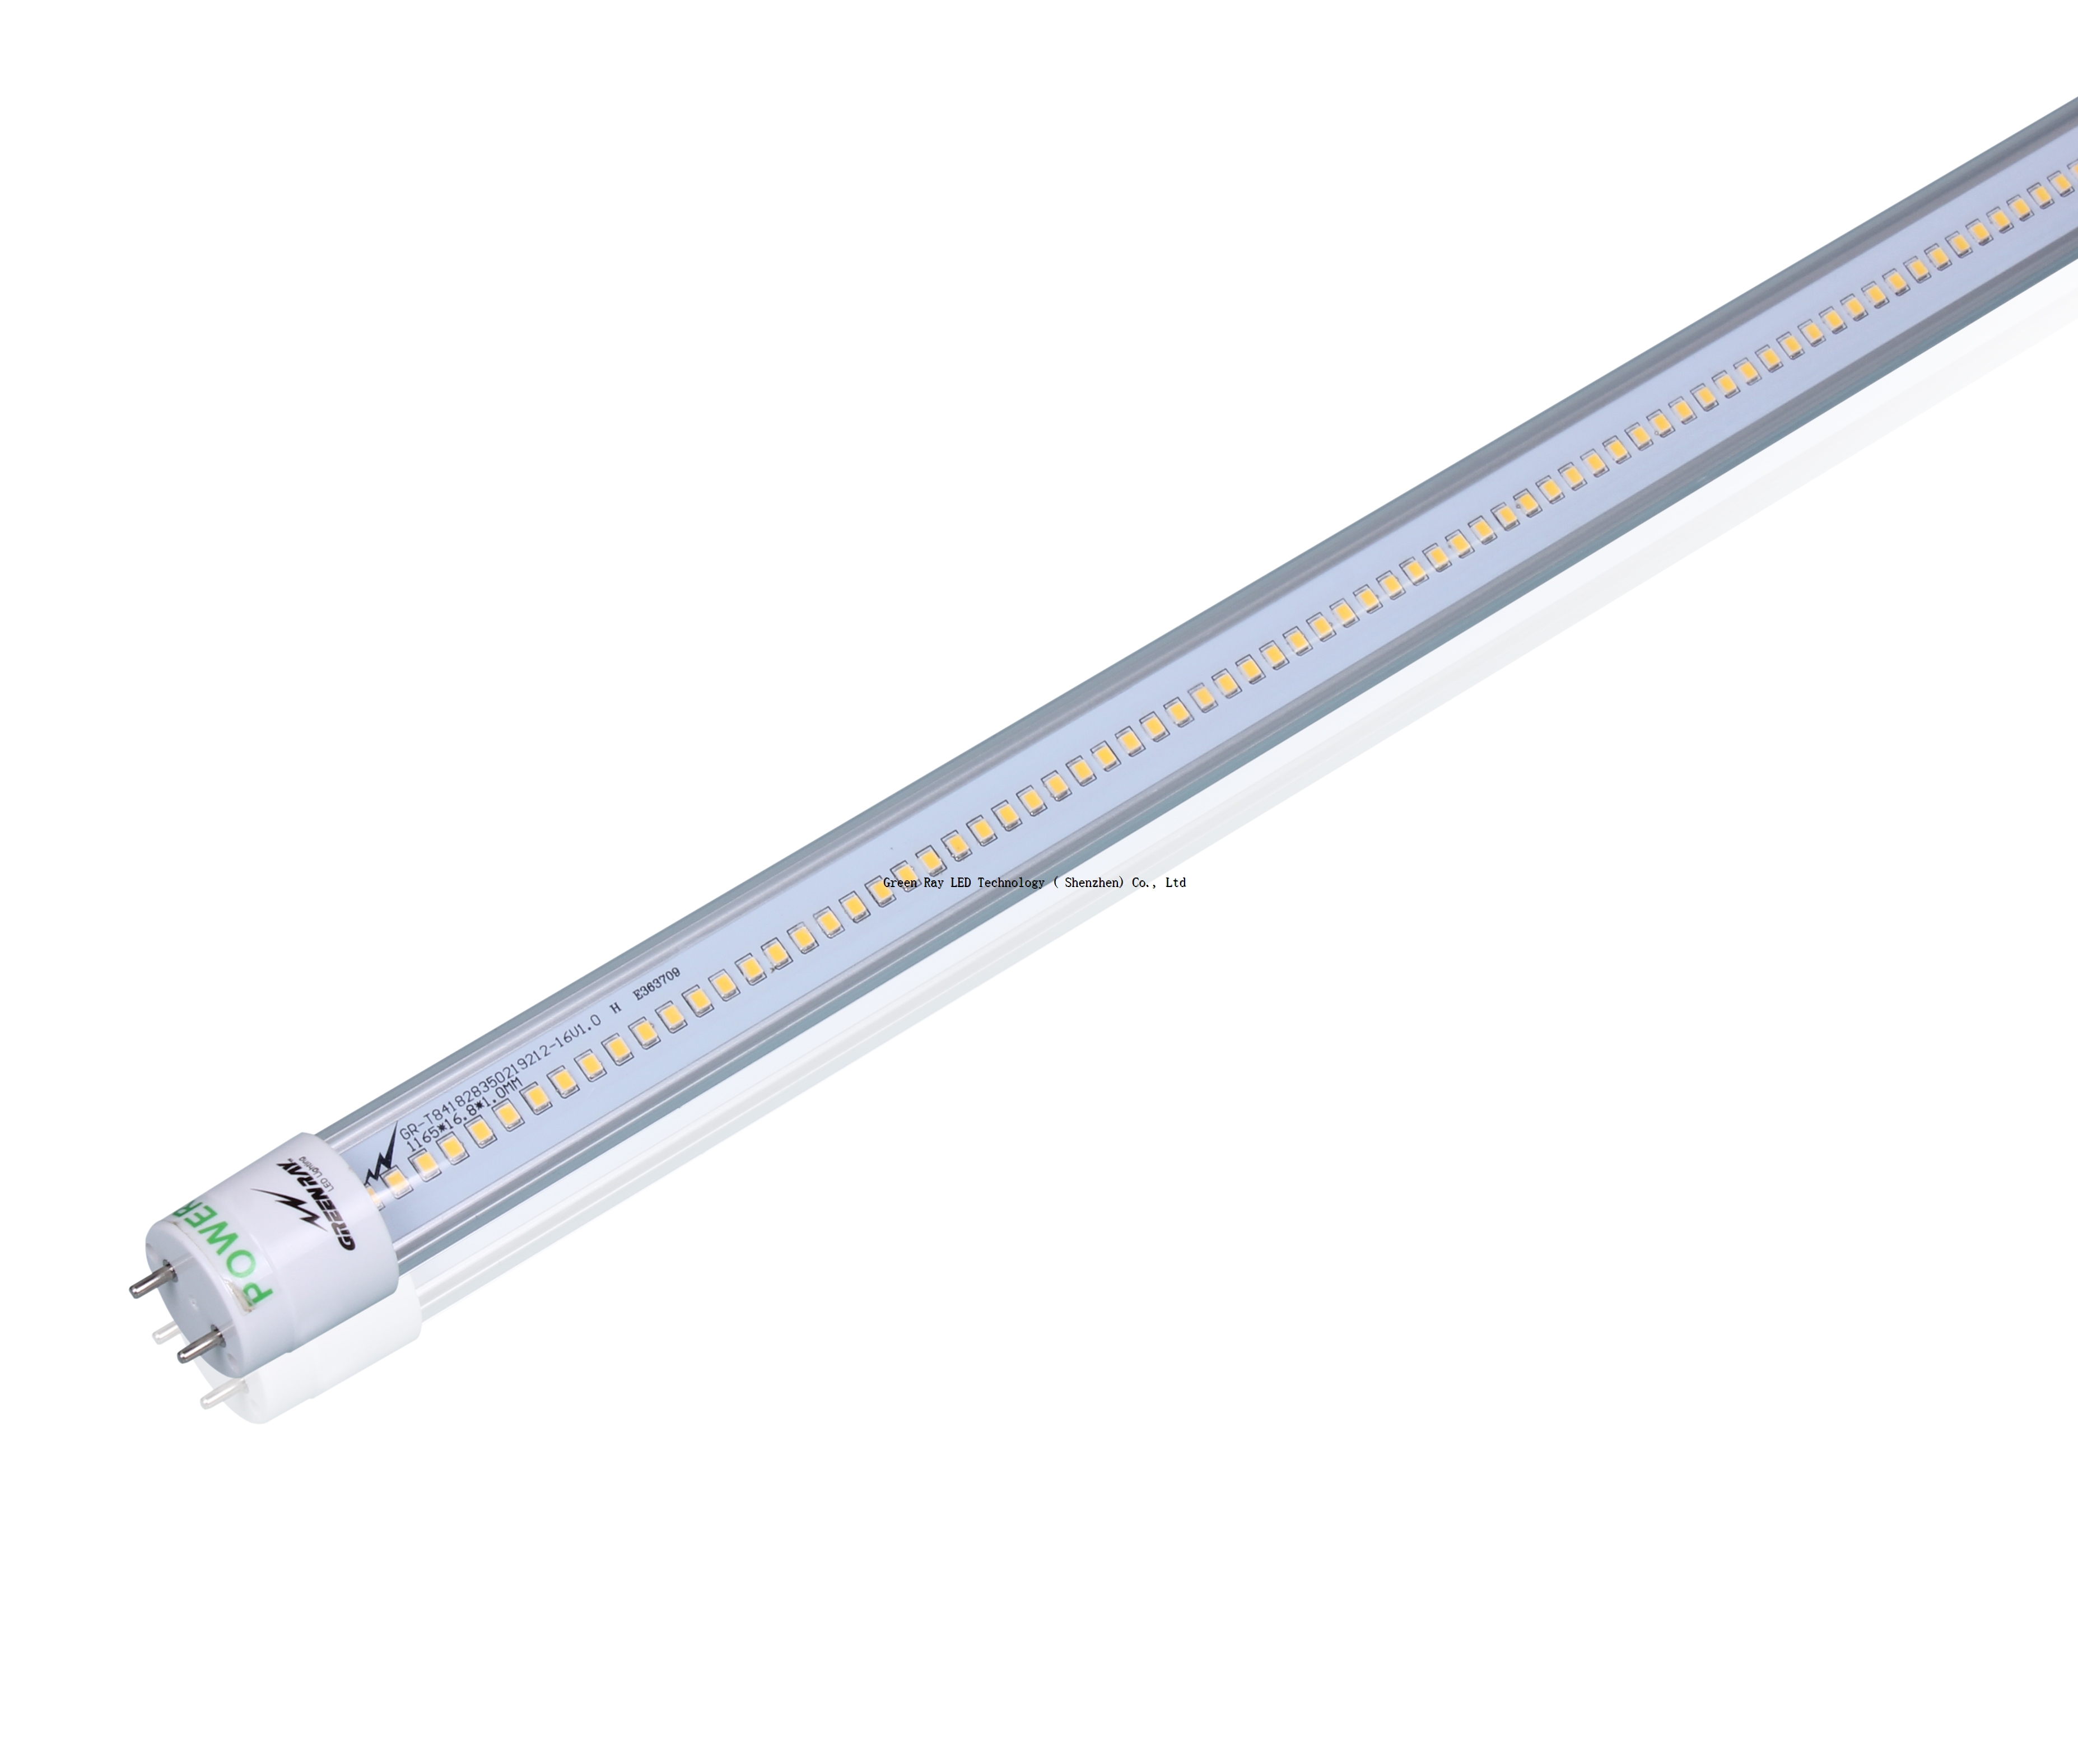 T8 LED tube, 1500mm, 20W,high efficiency 150lm/W, CE\RoHS\UL\DLC certificated, 5 years warranty